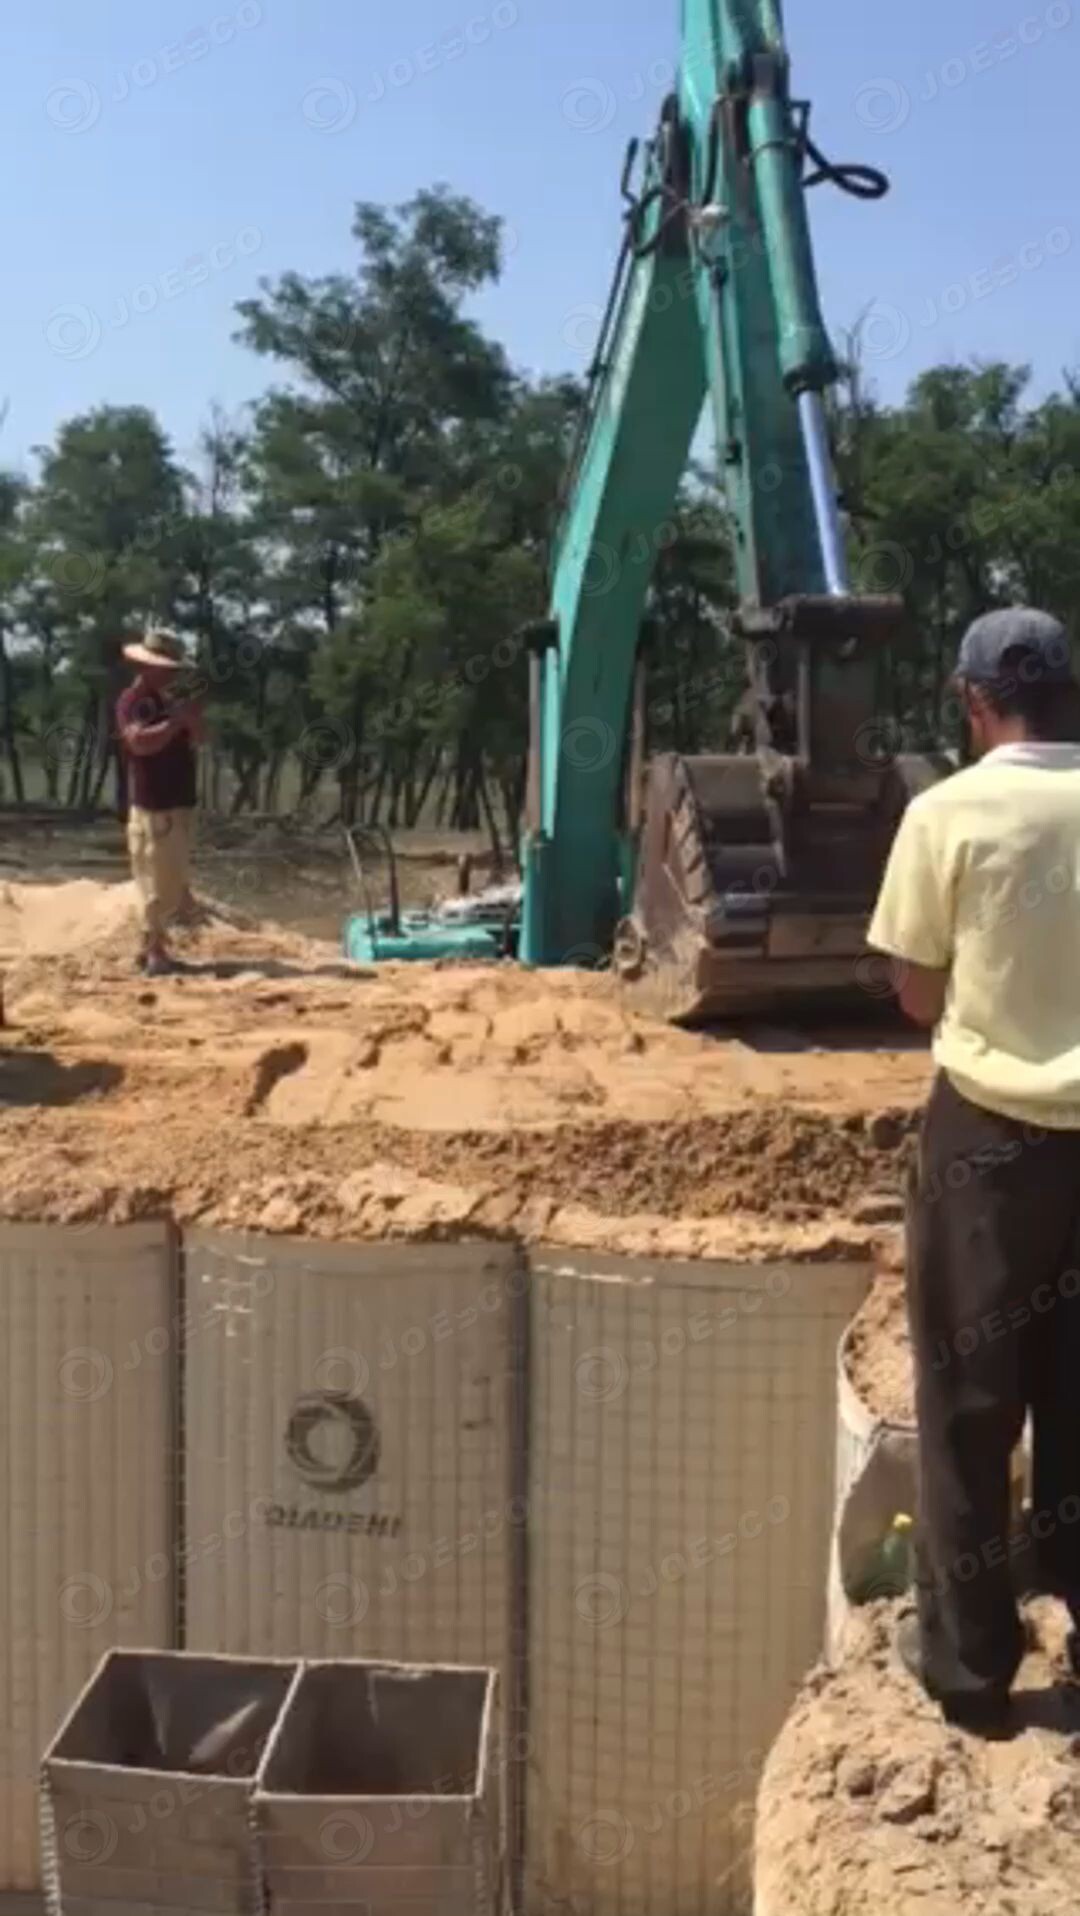 Workers are using a shovel bucket to smooth and compact the sand on the upper layer of the military barrier thumbnail 1